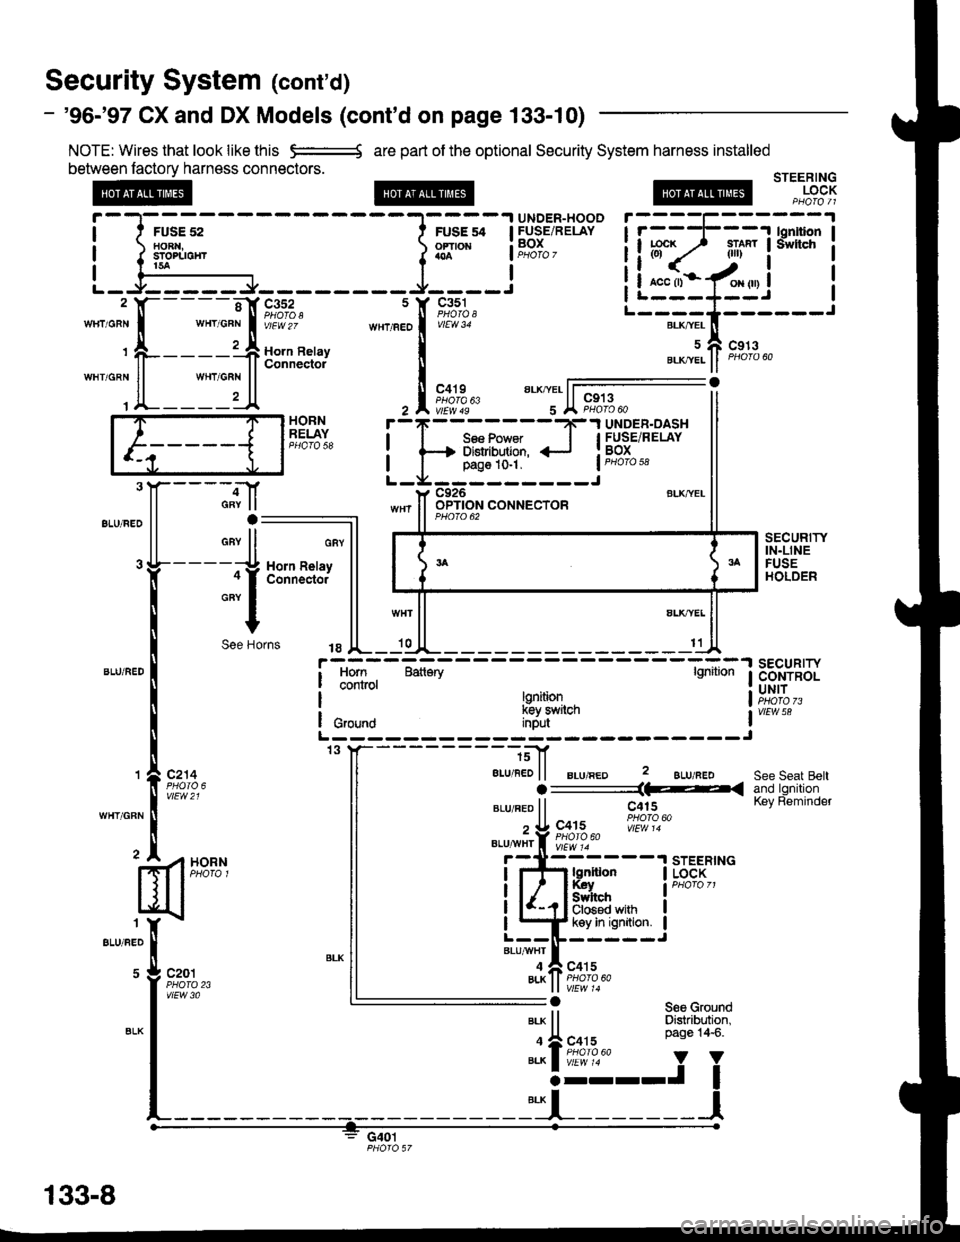 HONDA CIVIC 2000 6.G Service Manual Security System (contd)
- 96-97 CX and DX Models (contd on page 133-10)
NOTE: Wires that look like this e:=---{ are pan of the optional Security System harness installed
between factorv harness co